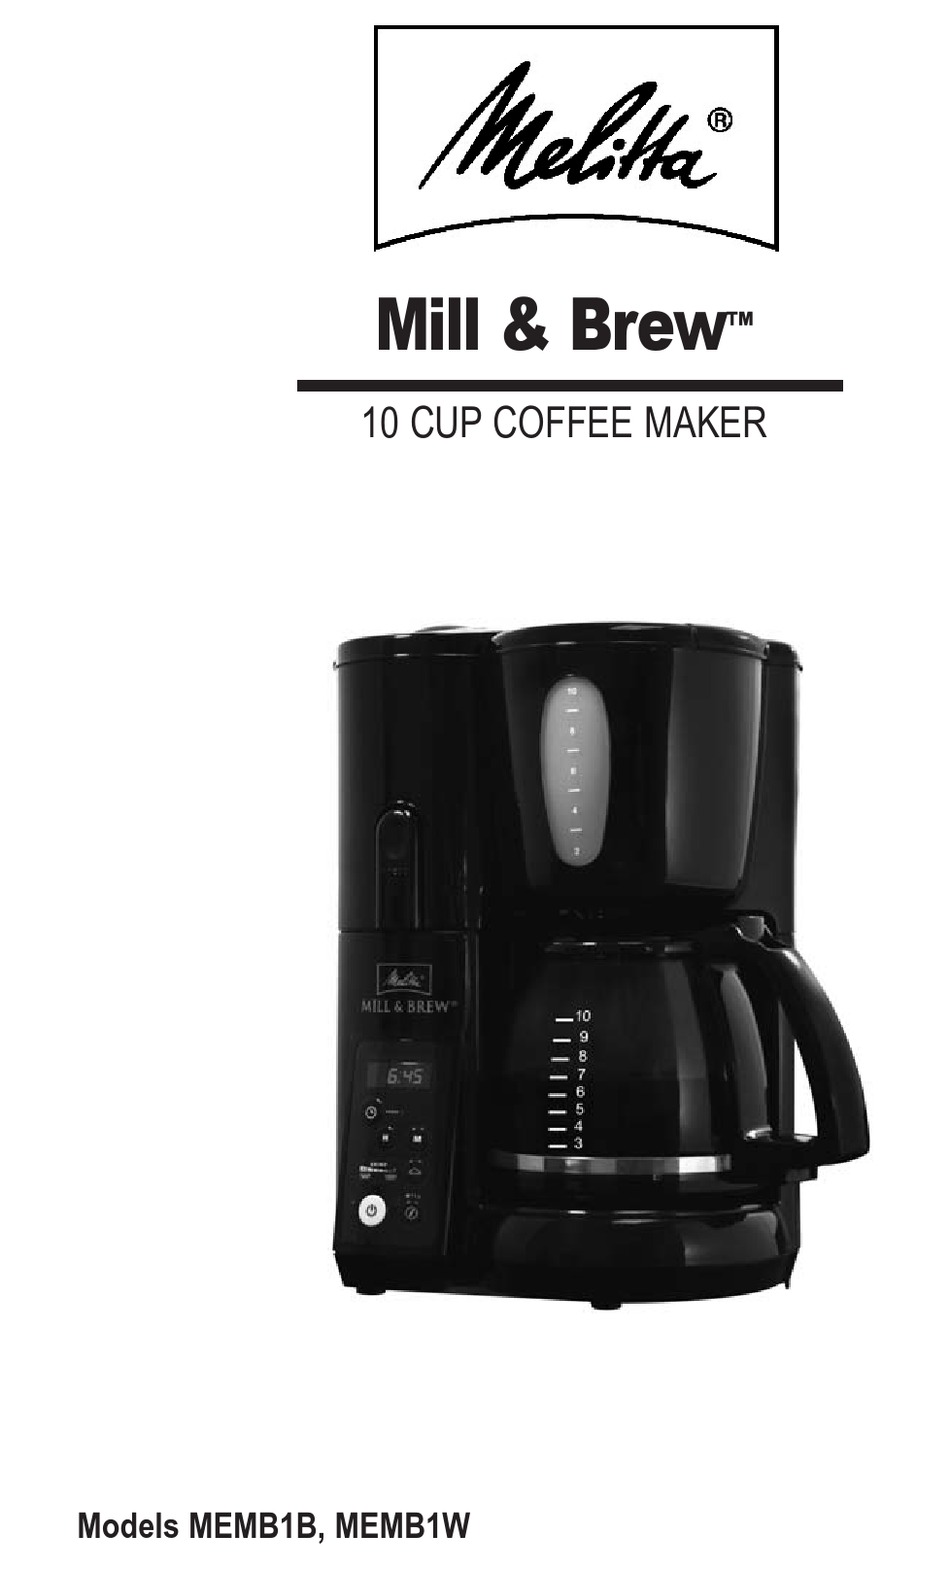 Mueller CB-175 QuickBrew Cold Brew Coffee and Tea Maker Instruction manual